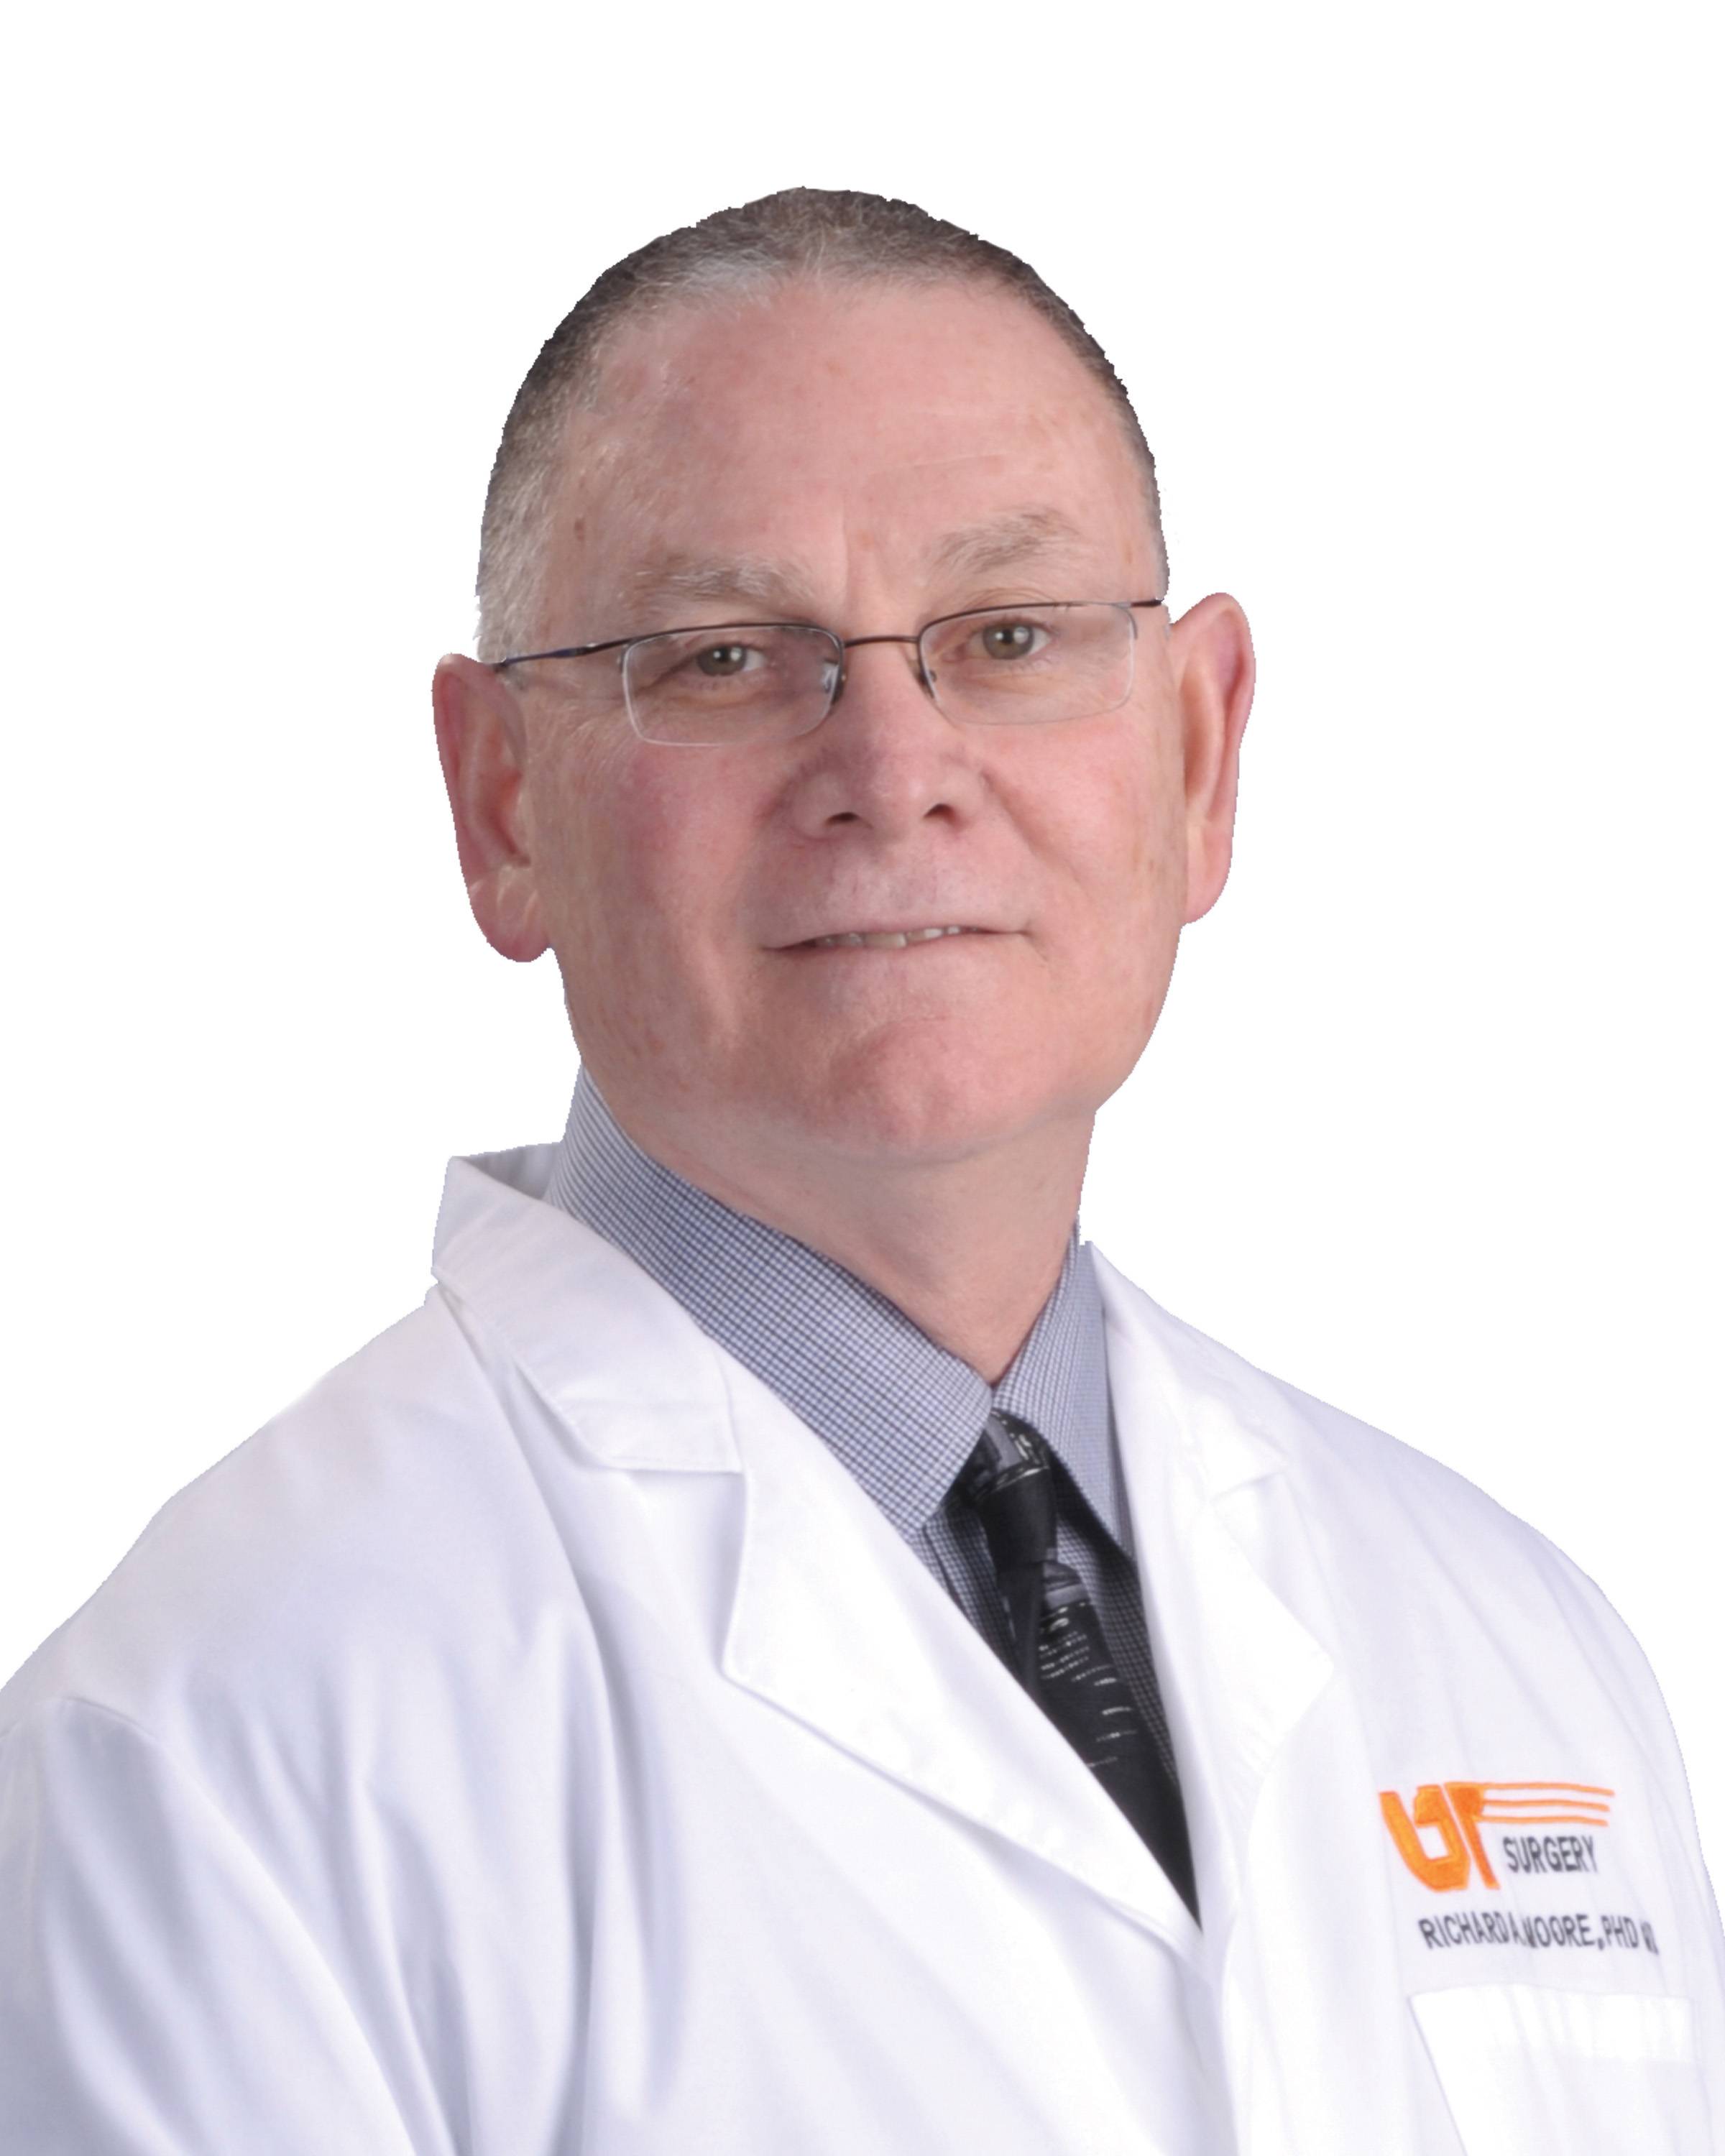 Richard Moore, MD, PhD, FACS, FASCRS, Associate Program Director, Colon and Rectal Surgery Fellowship and Surgery Residency